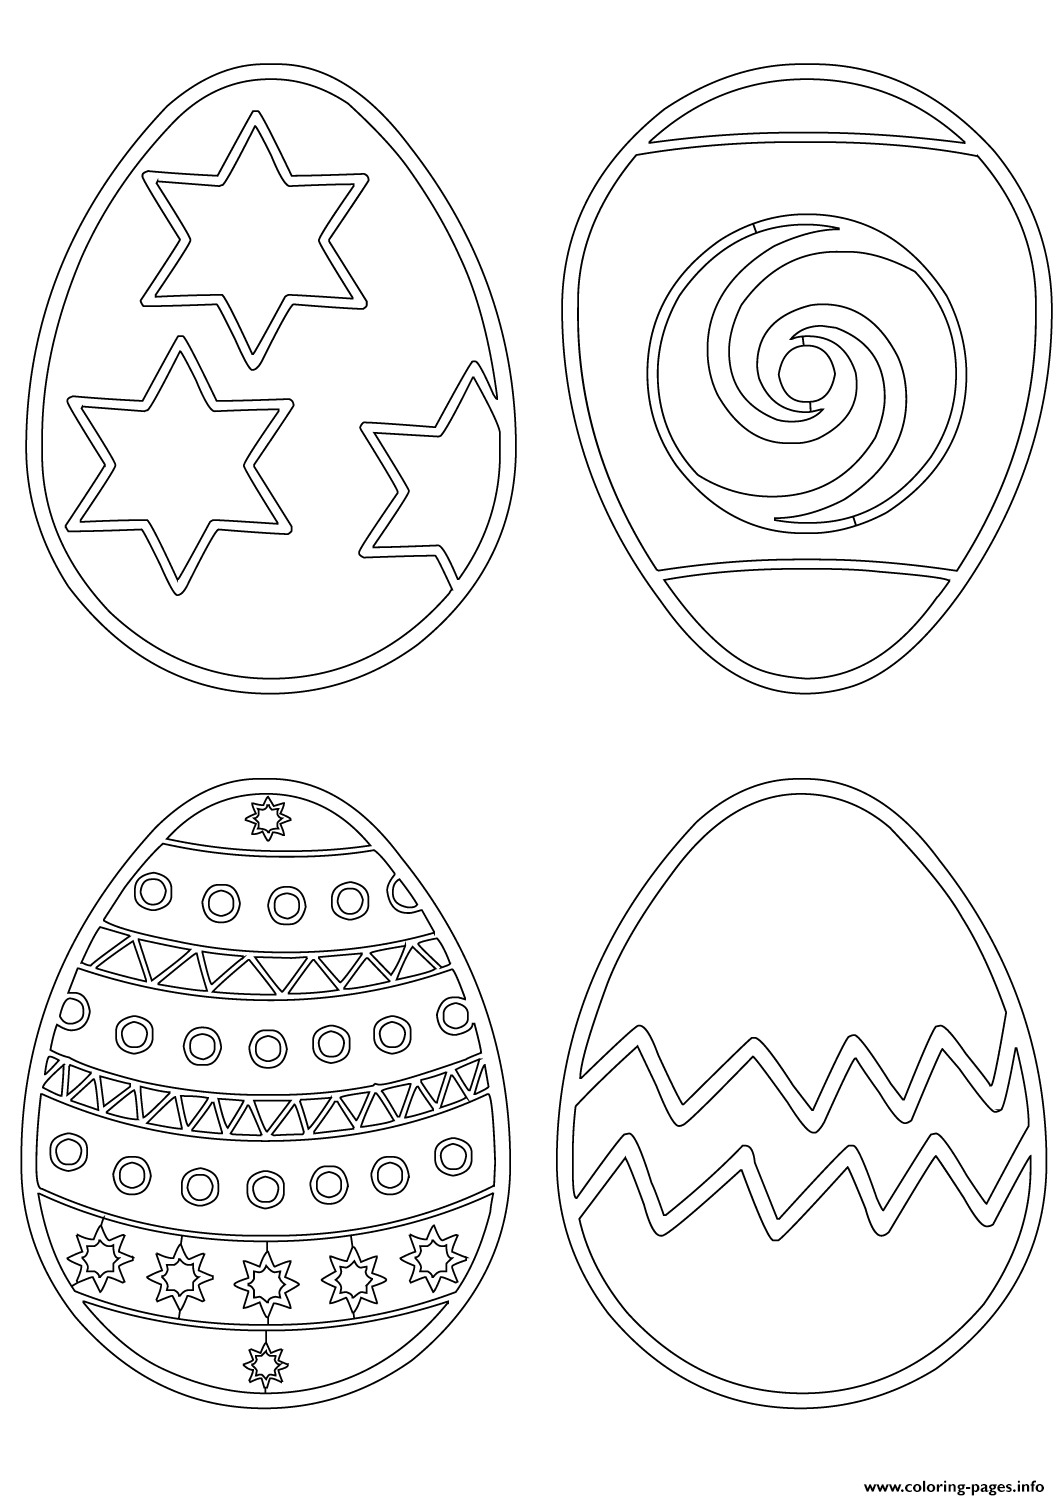 Easter Eggs Patterns coloring